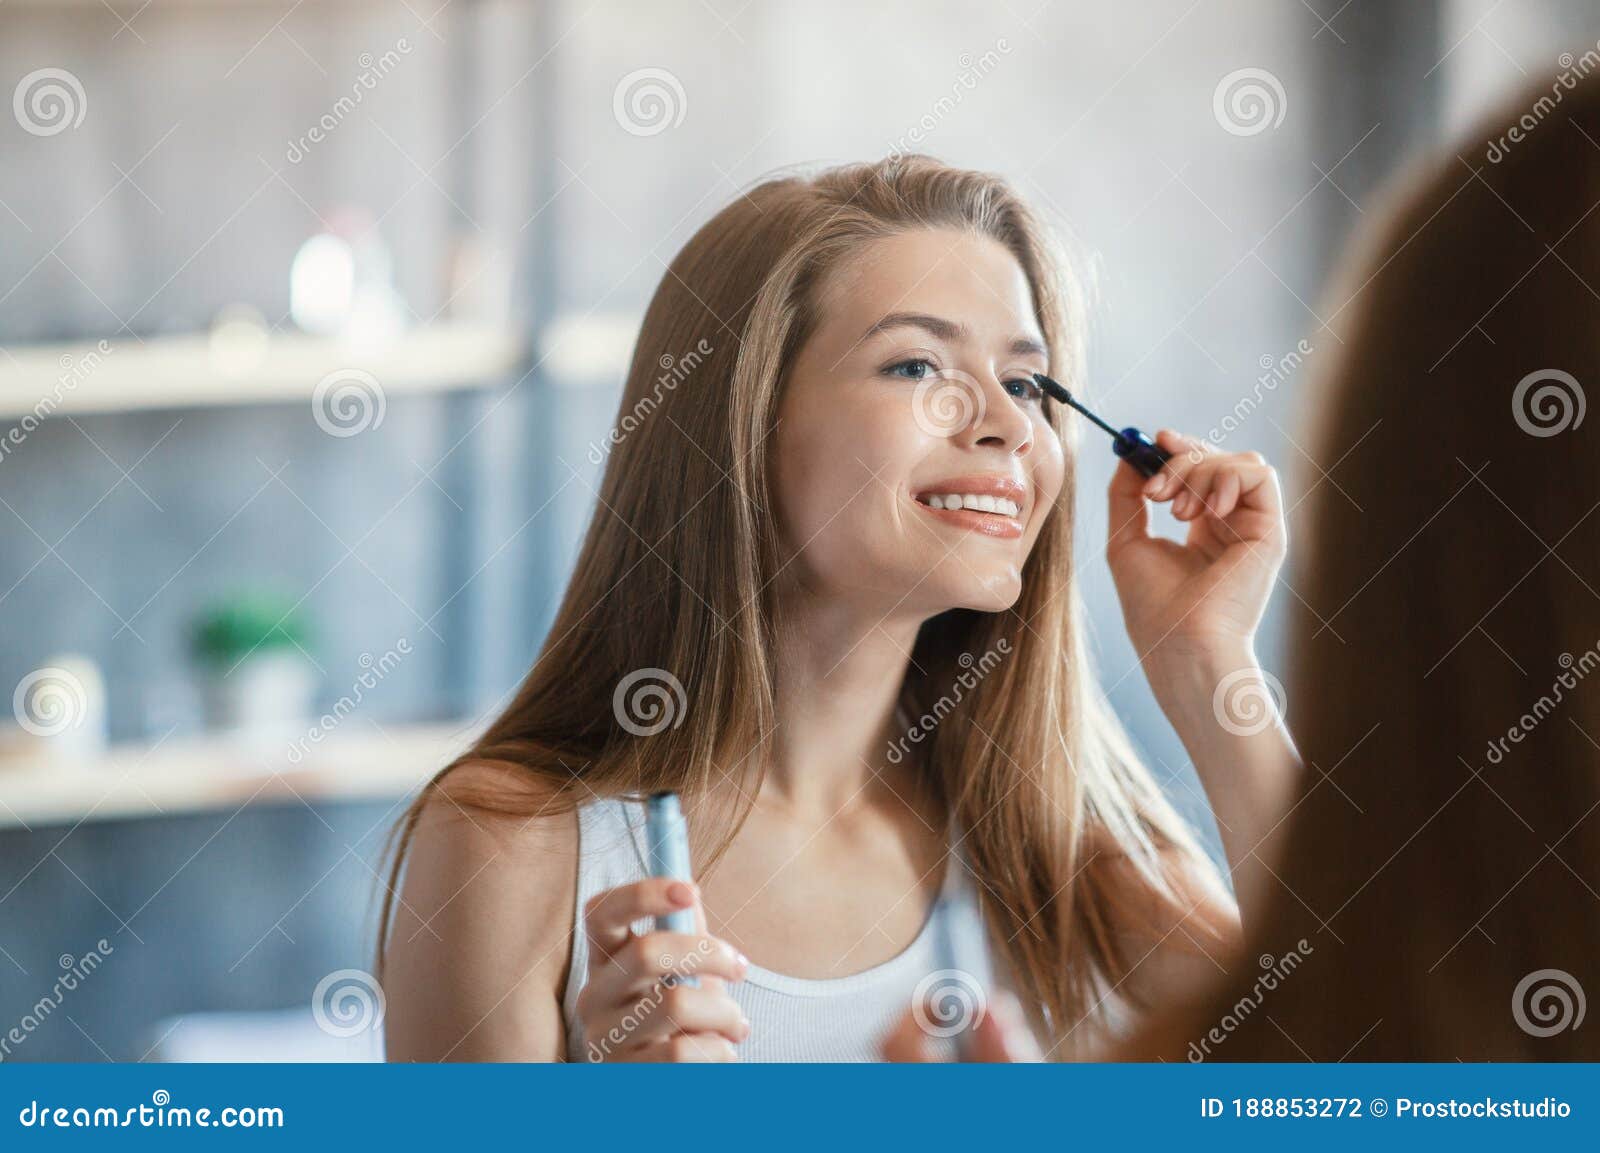 Beauty And Makeup. Sweet Lady Applying Mascara On Her ...